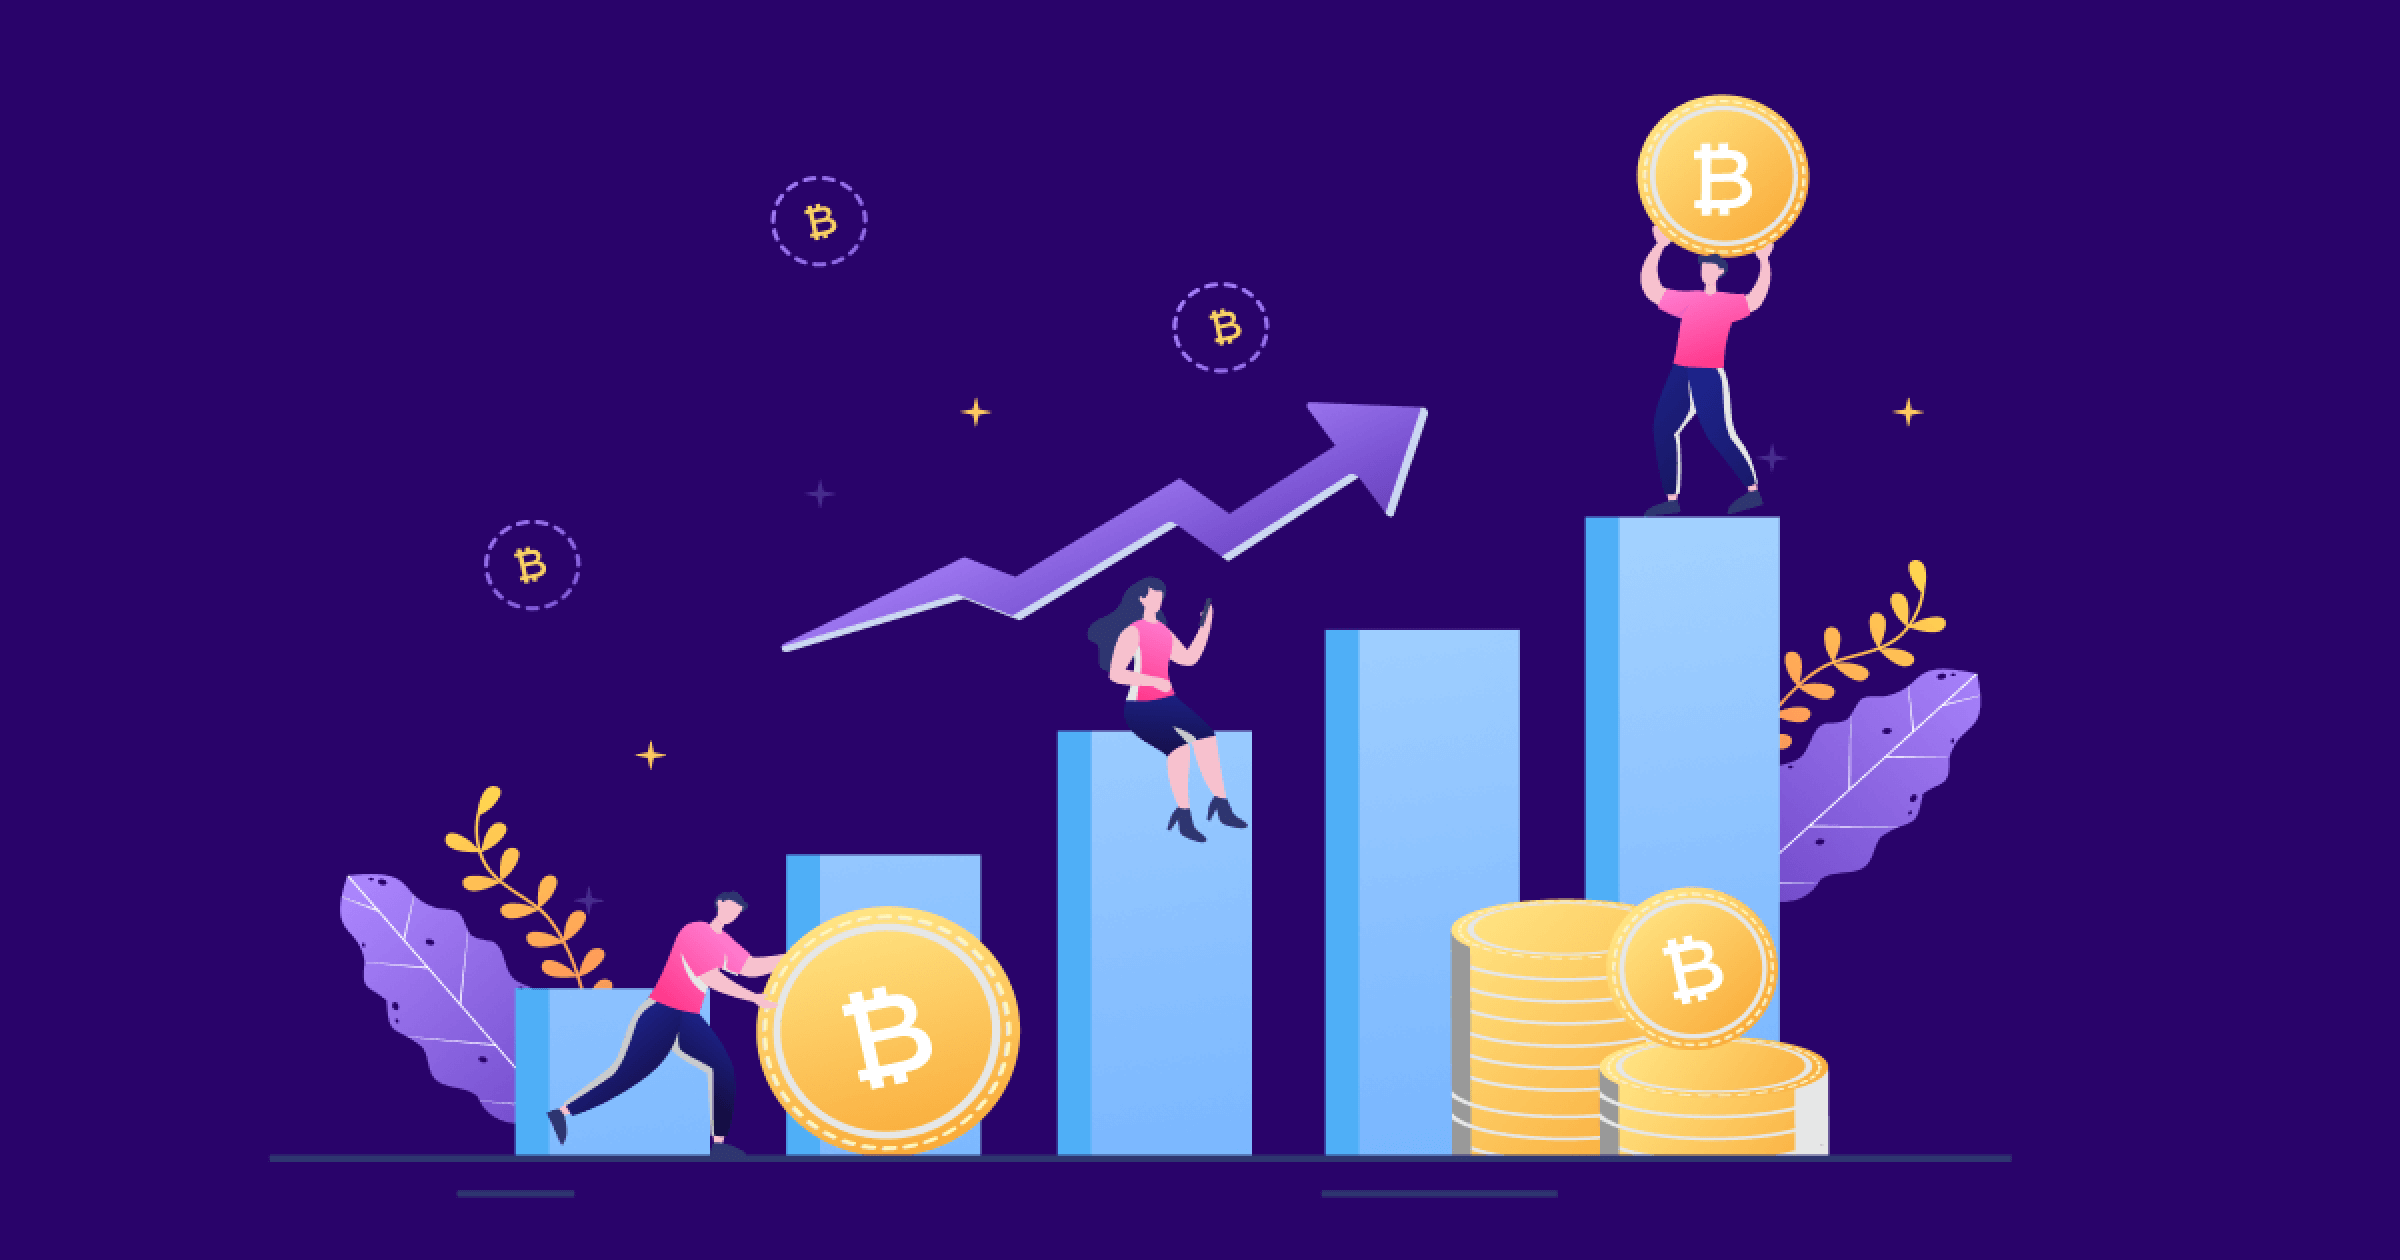 What Cryptocurrency to Invest In